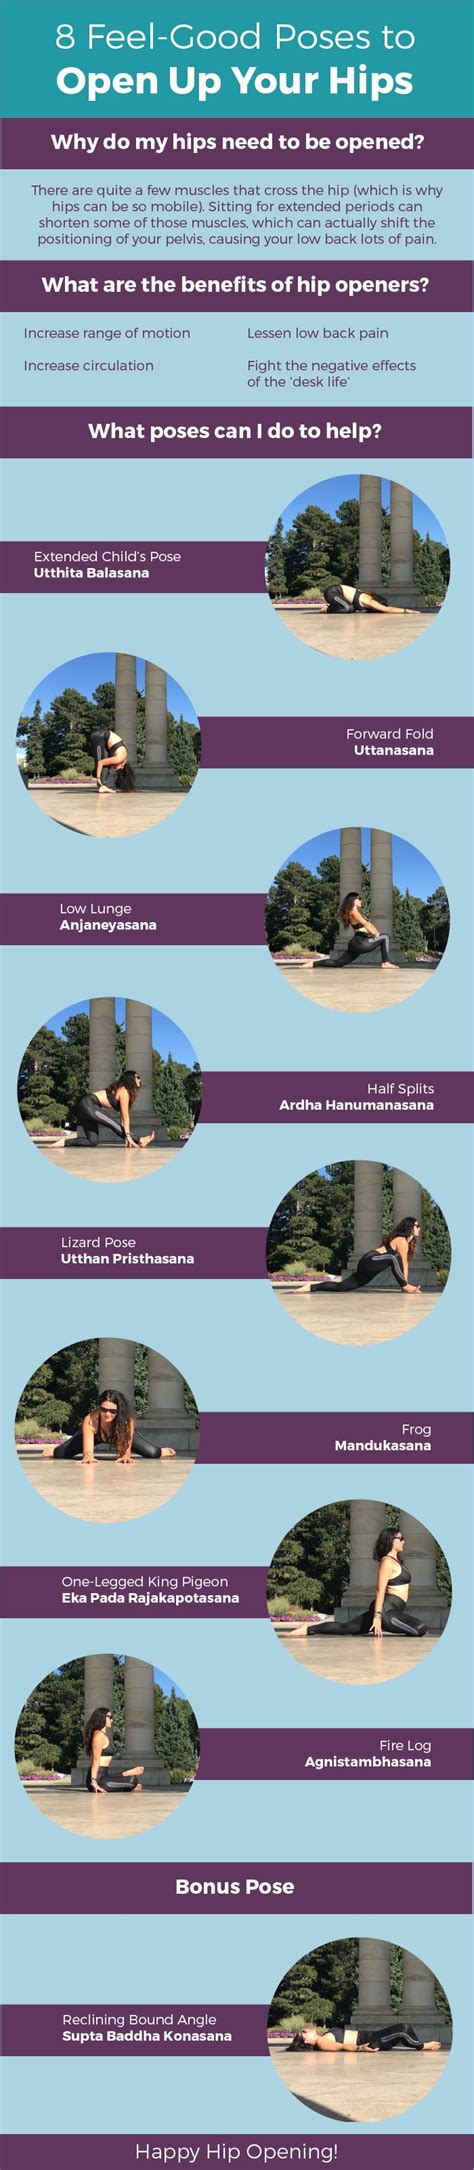 8 Feel Good Poses To Open Up Your Hips — Welcome Good Poses Muscles